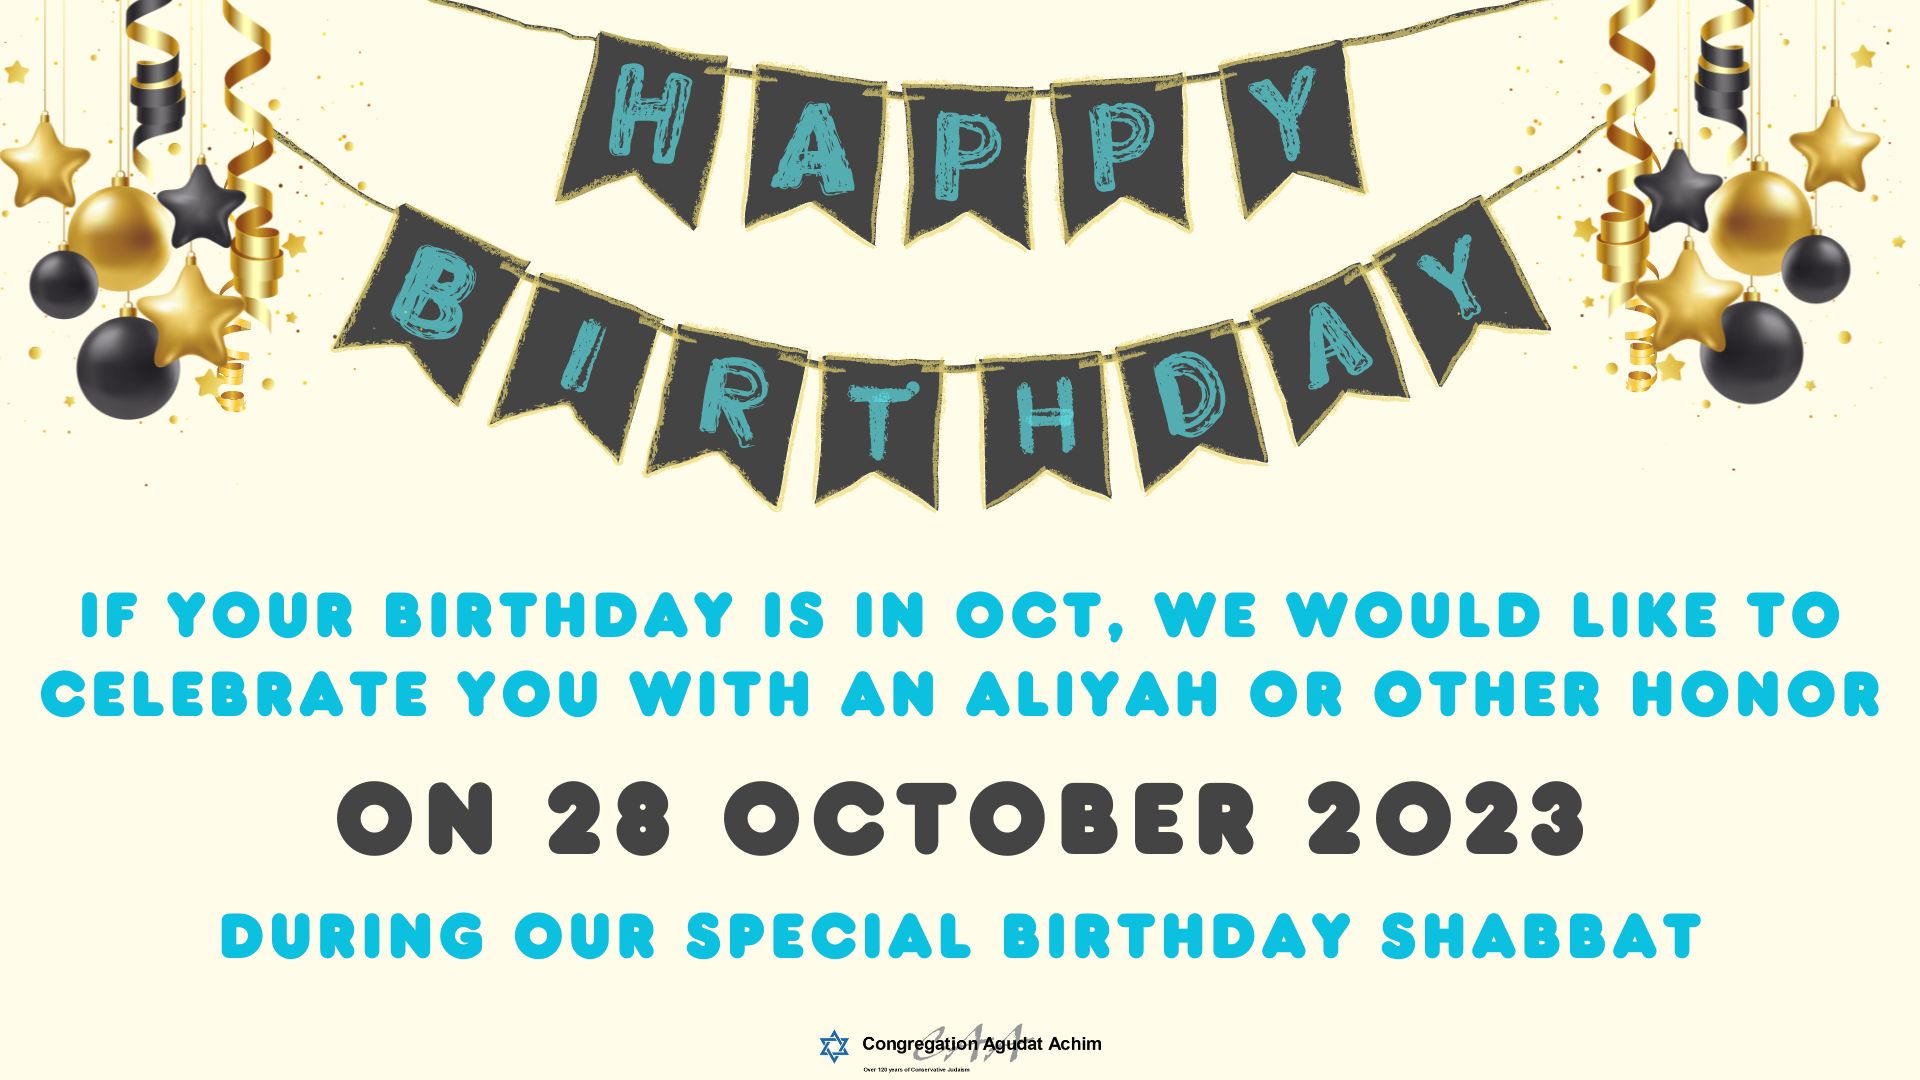 Celebrate and attend Shabbat morning services in October as we honor our congregants' birthdays